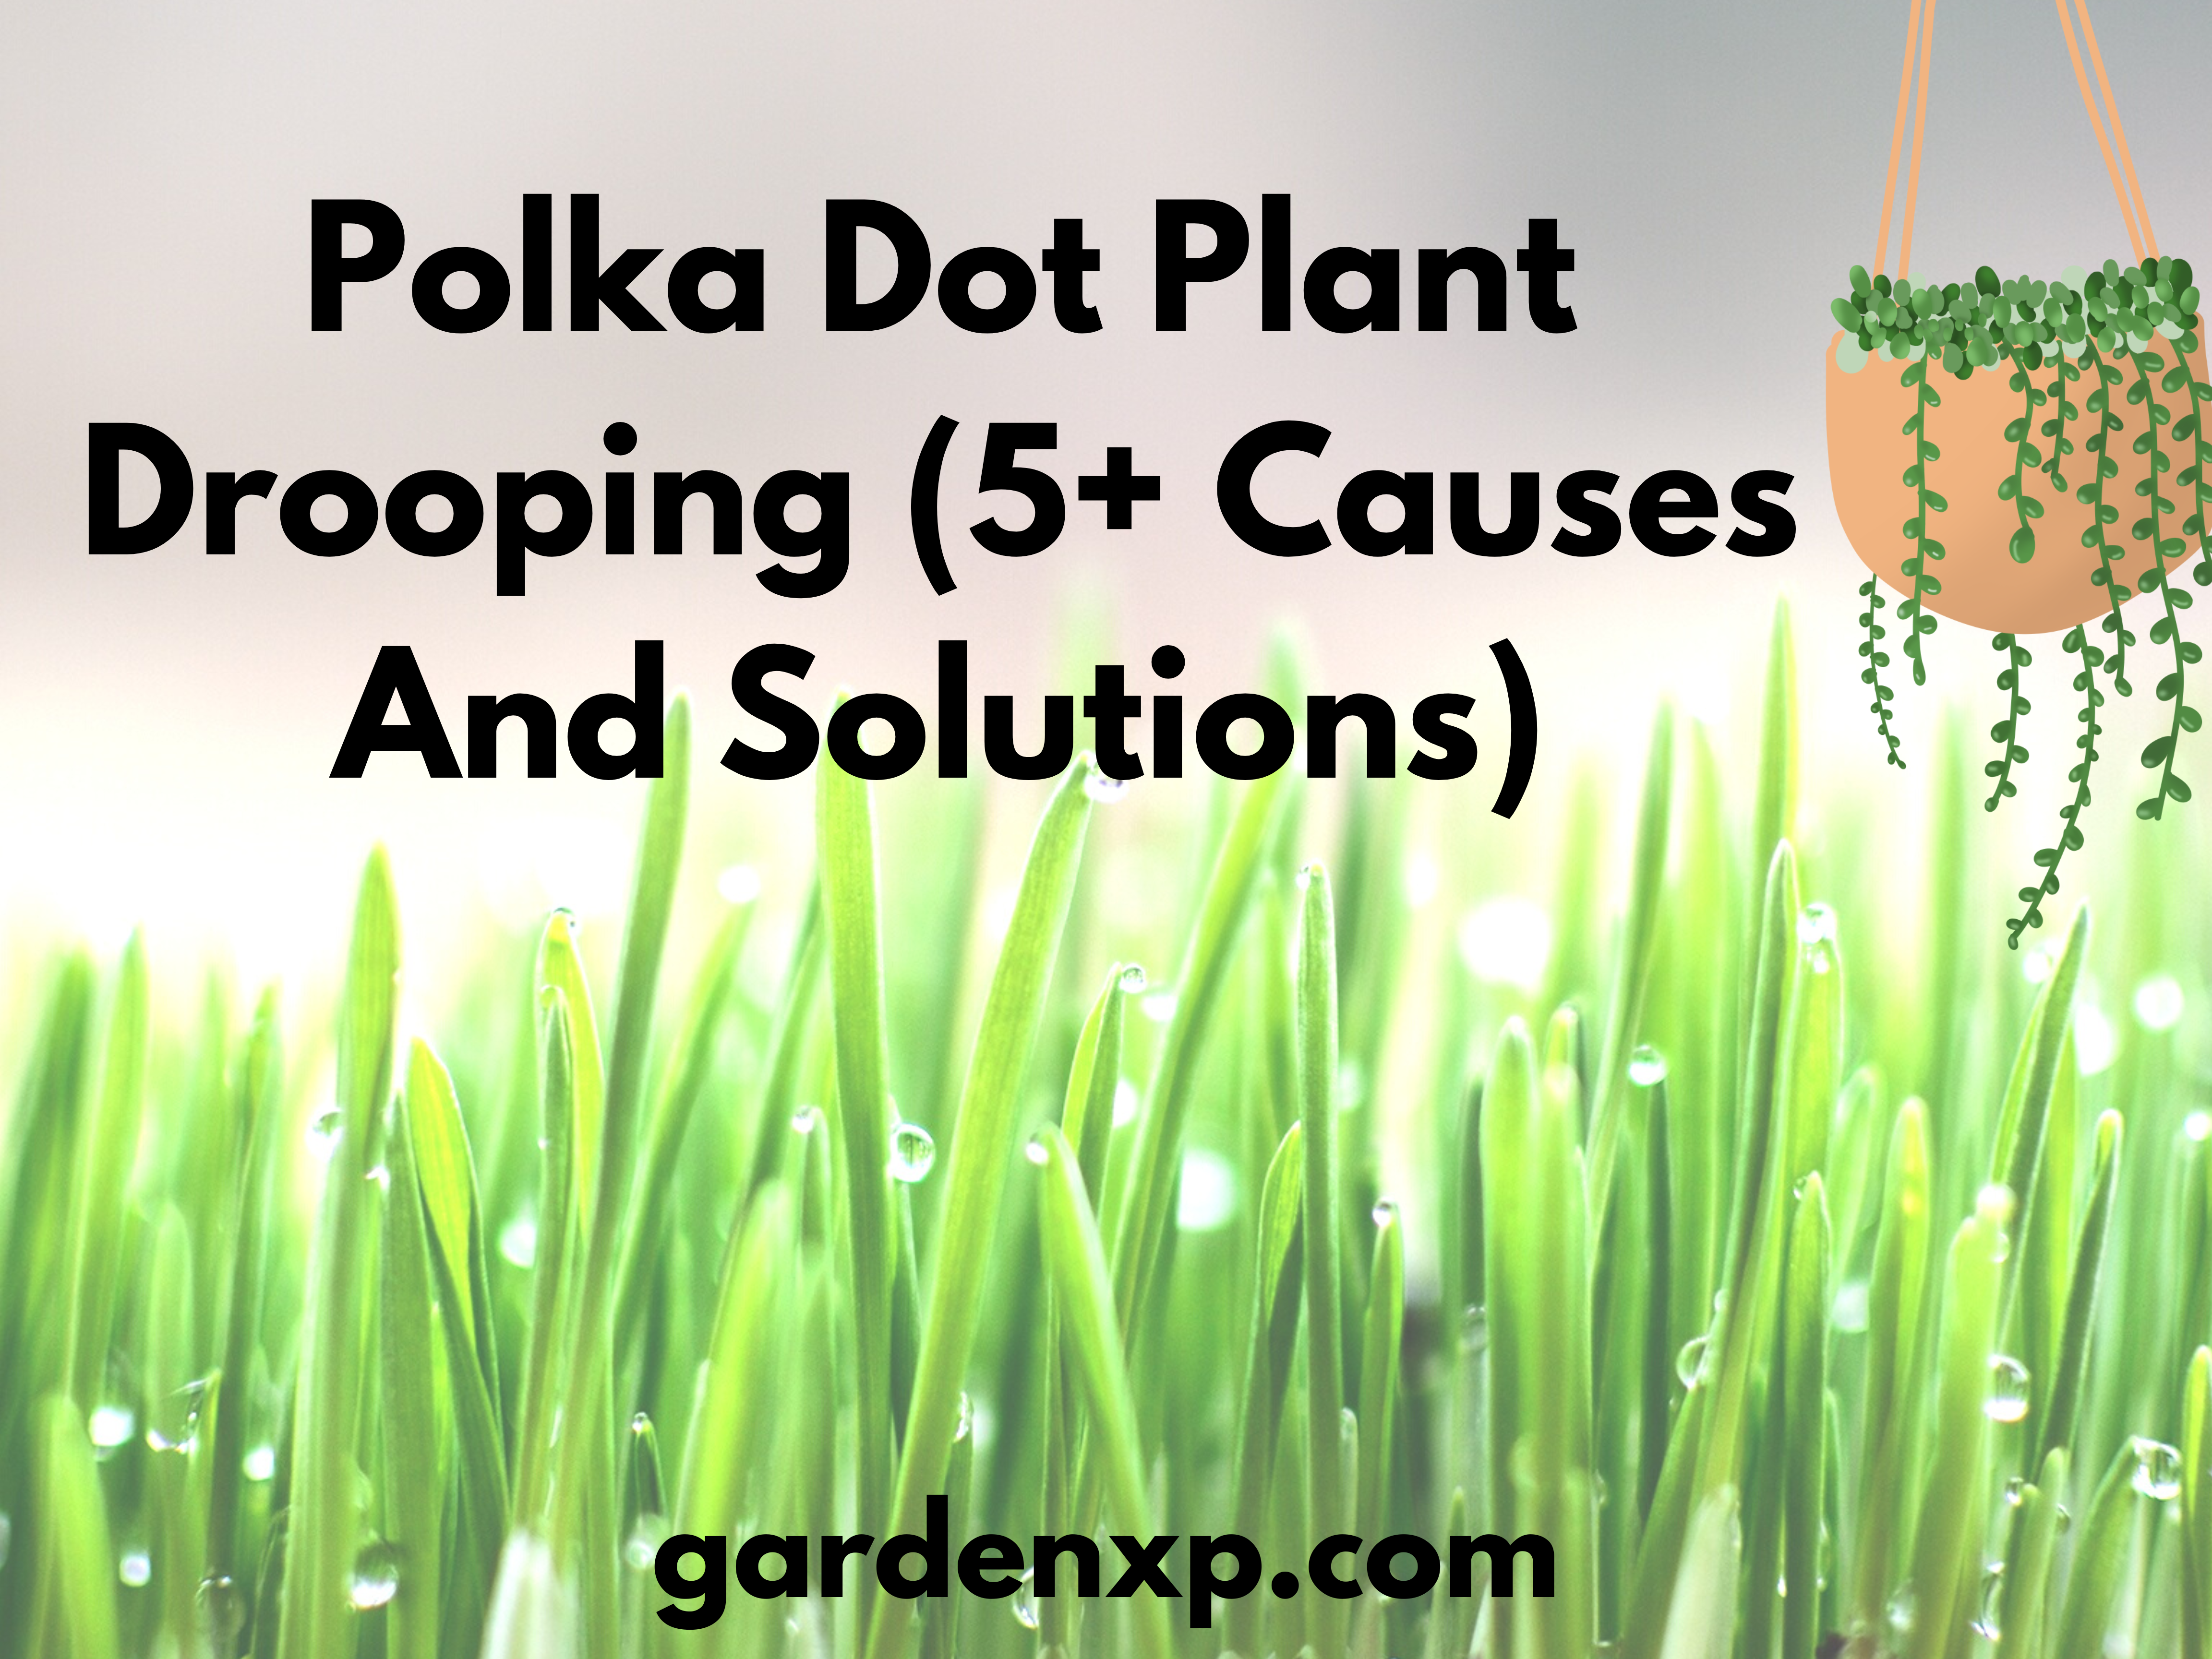 Polka Dot Plant Drooping (5+ Causes And Solutions)